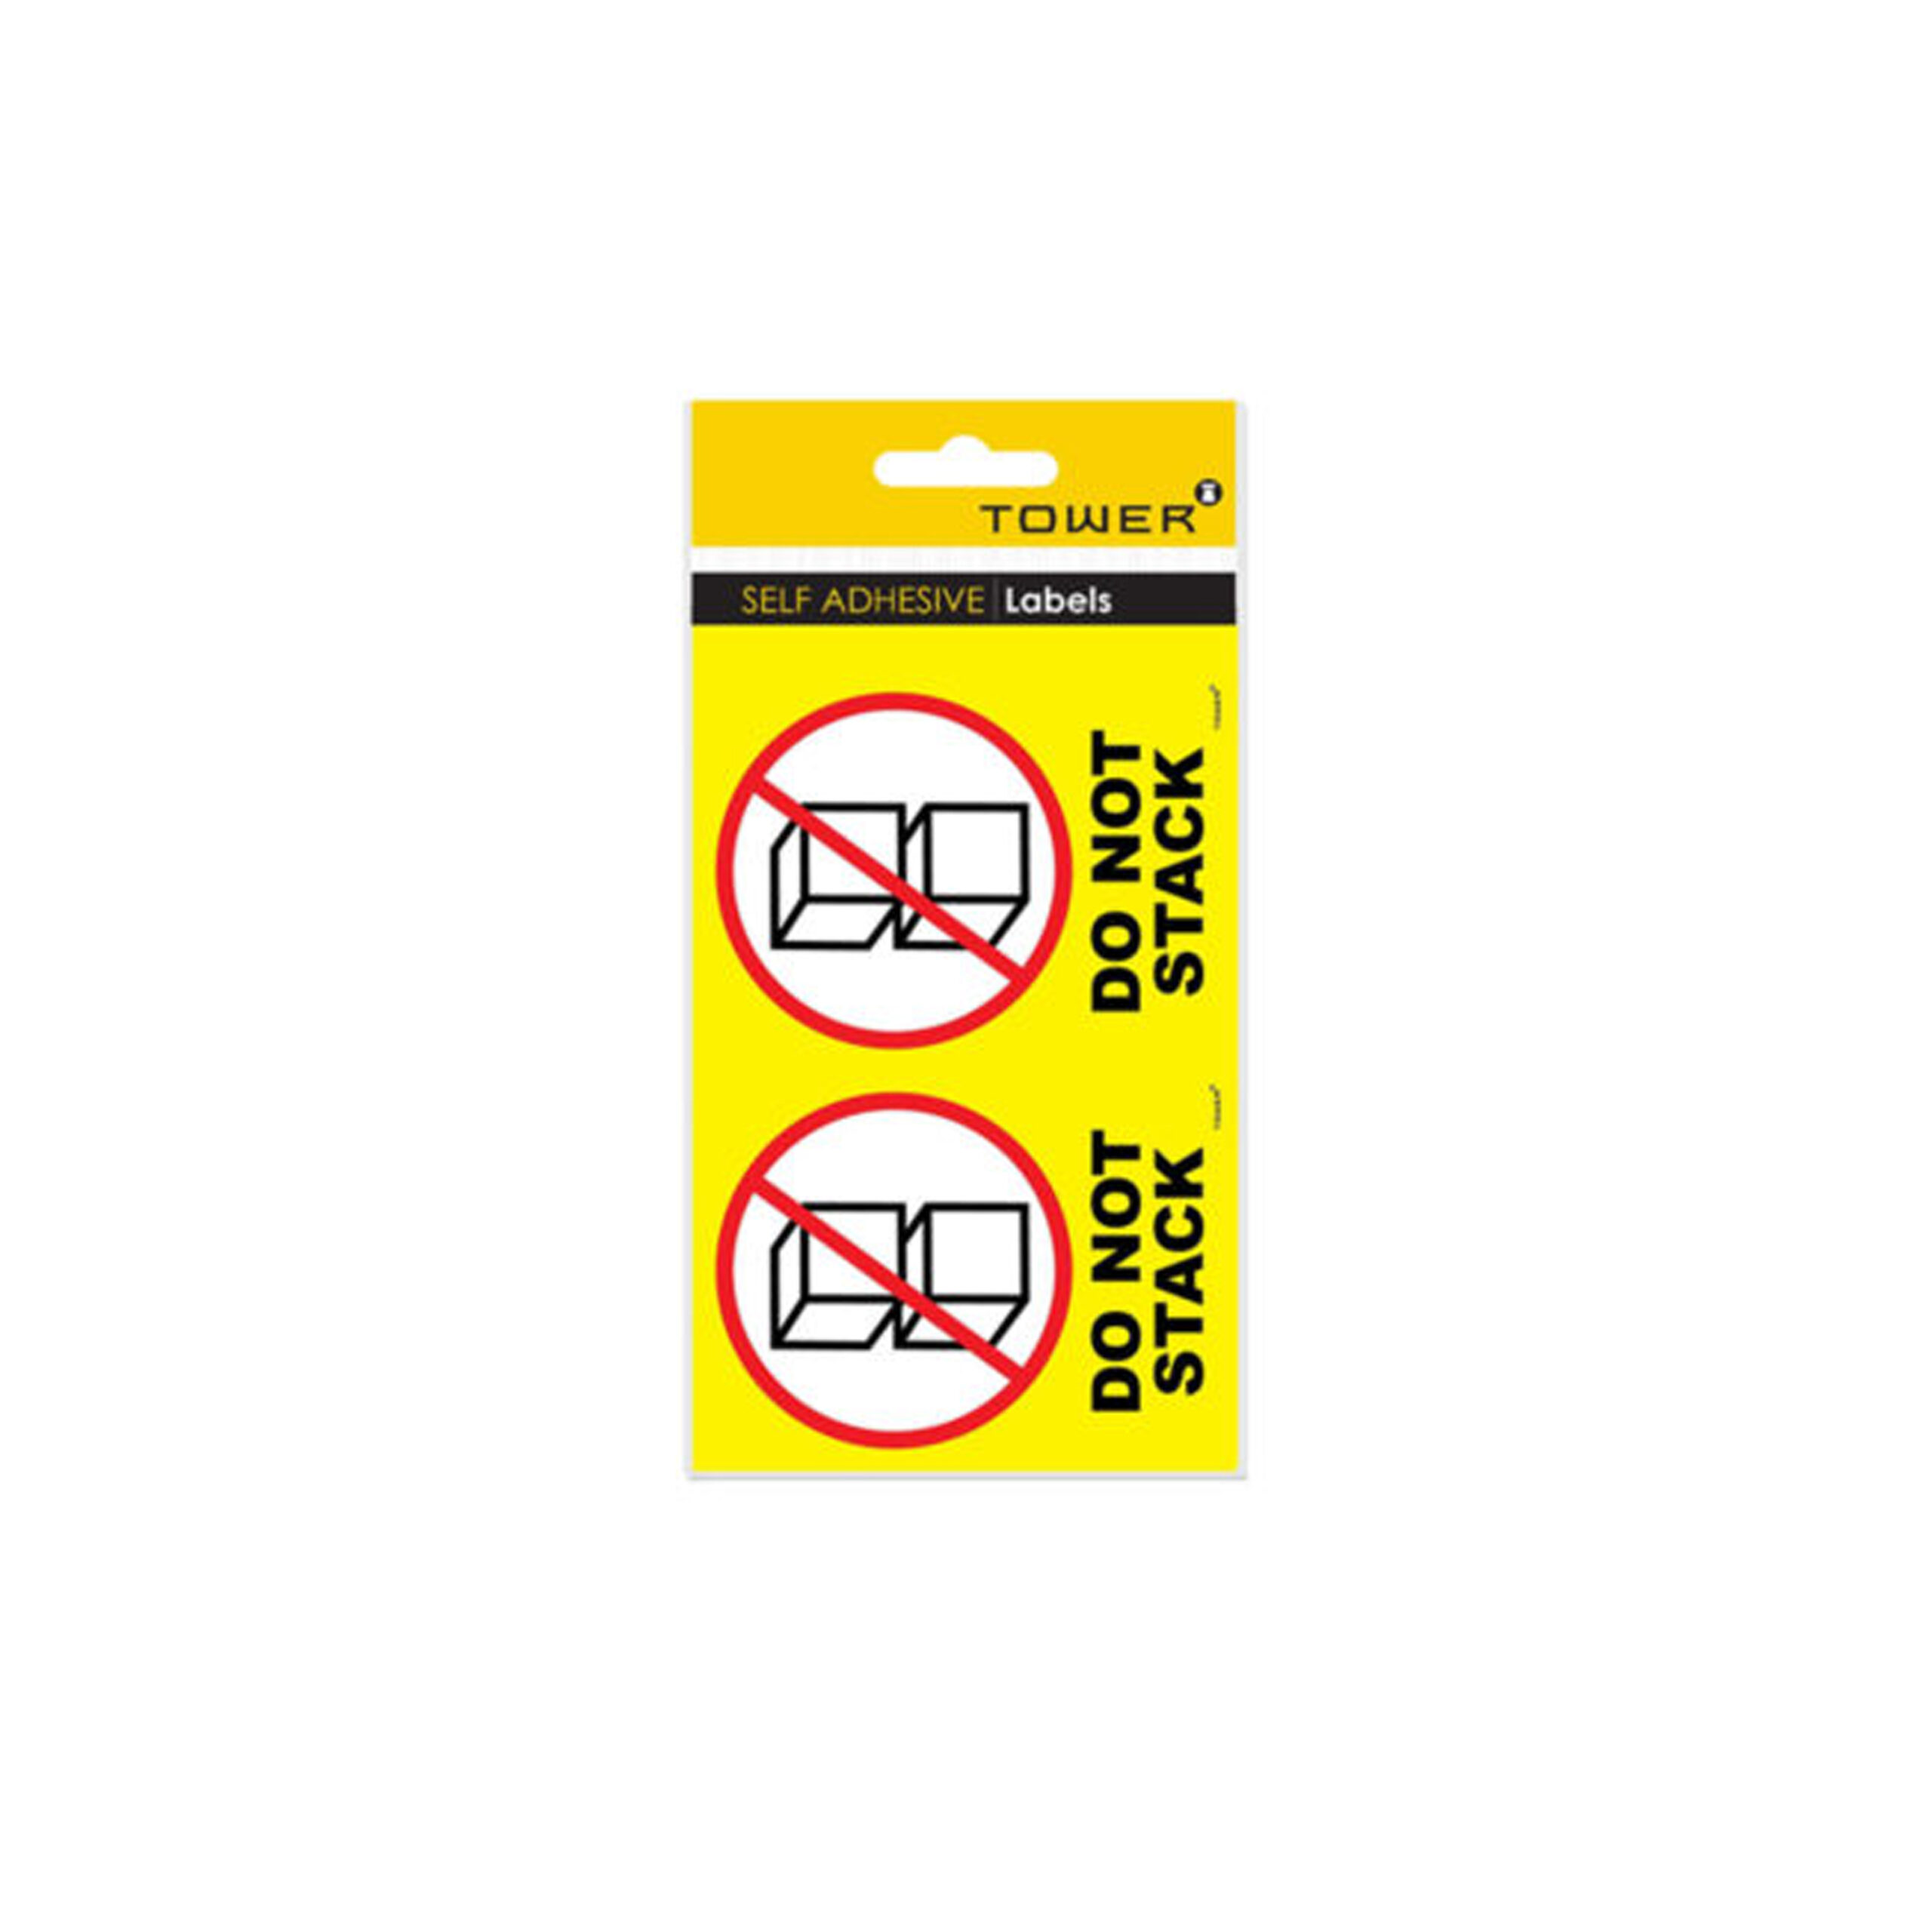 TOWER SELF
ADHESIVE "DO NOT
STACK" LABELS
81x110mm(30
LABELS